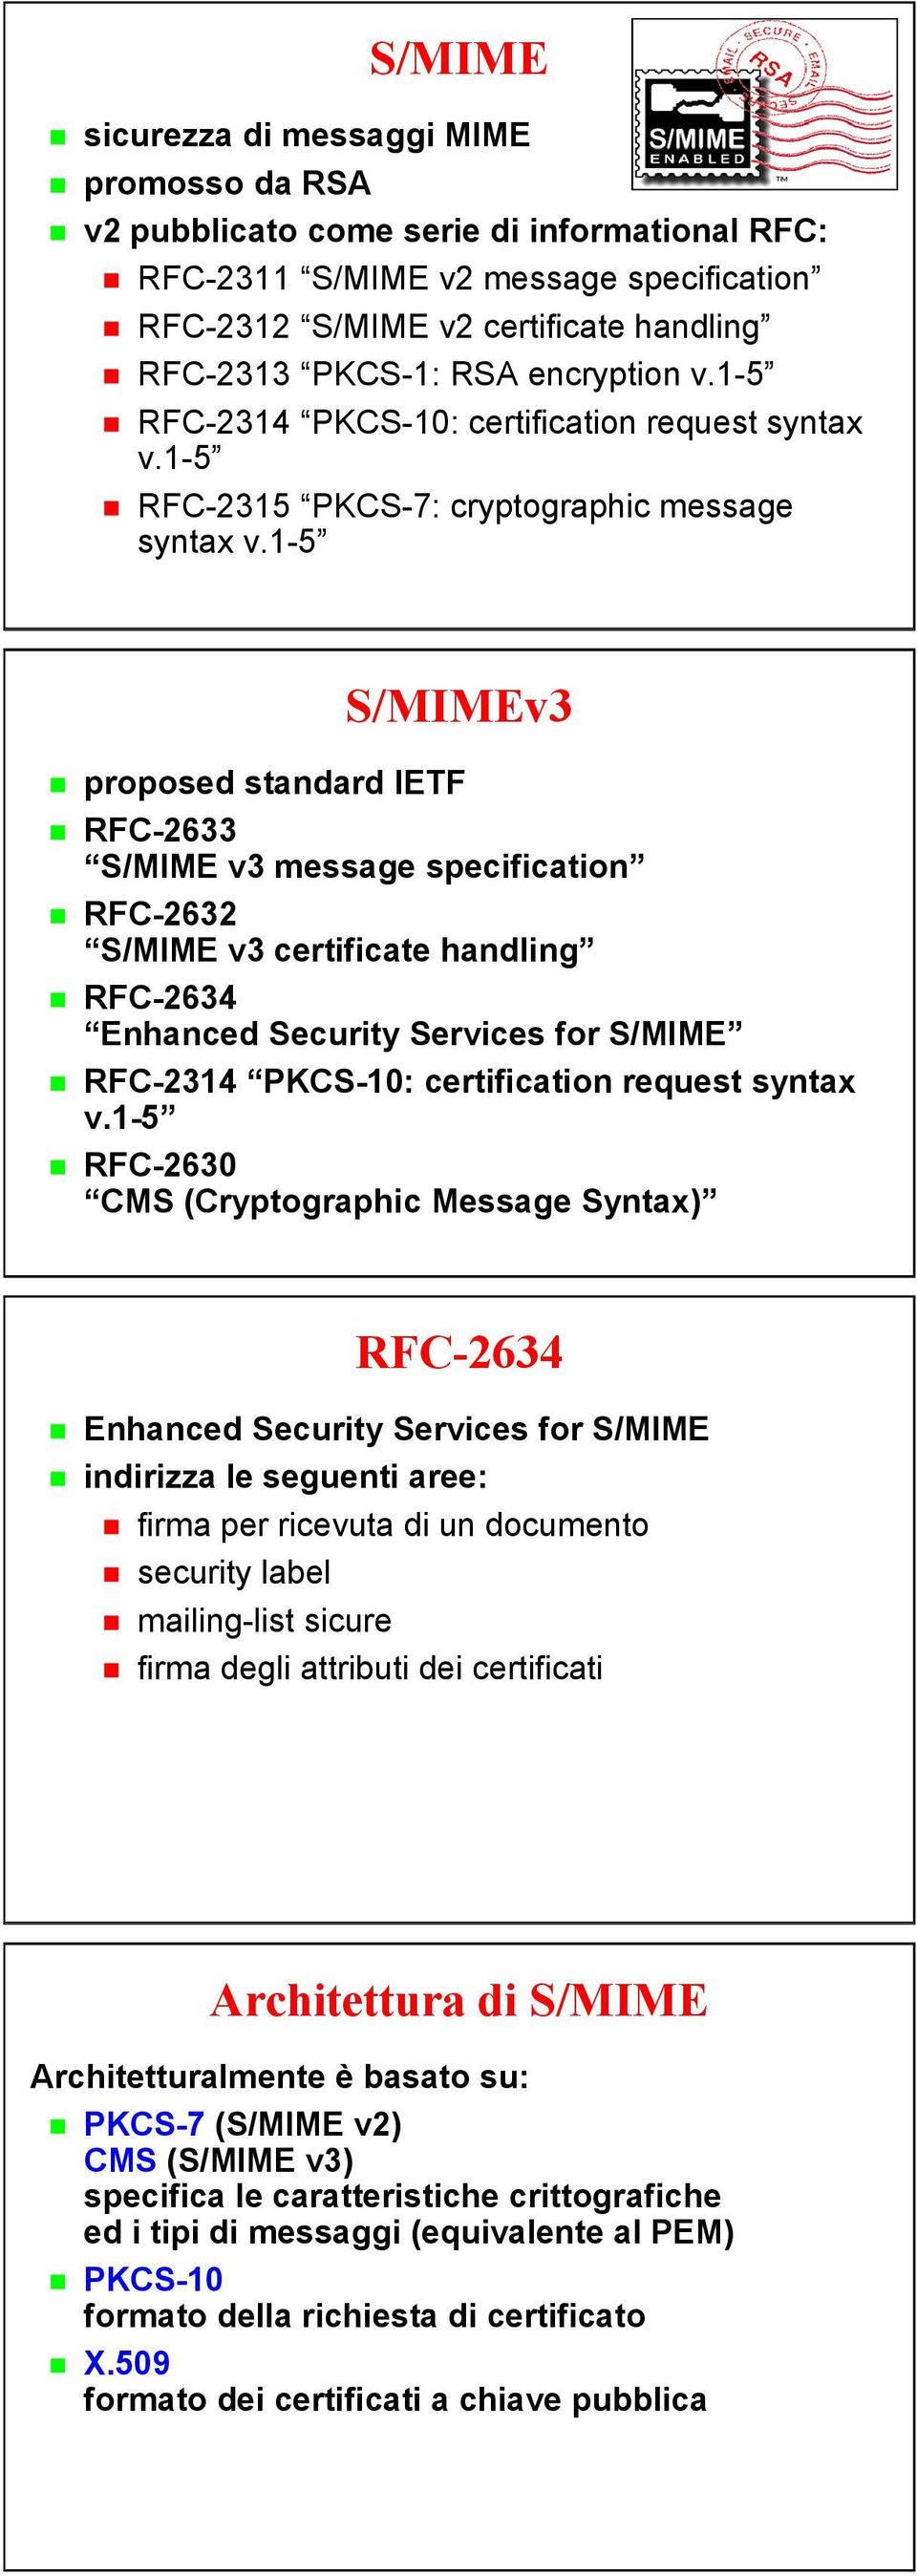 1-5 come serie di informational RFC: RFC-2311 RFC-2315 S/MIME PKCS-7: v2 cryptographic message specification message RFC-2312 syntax v.